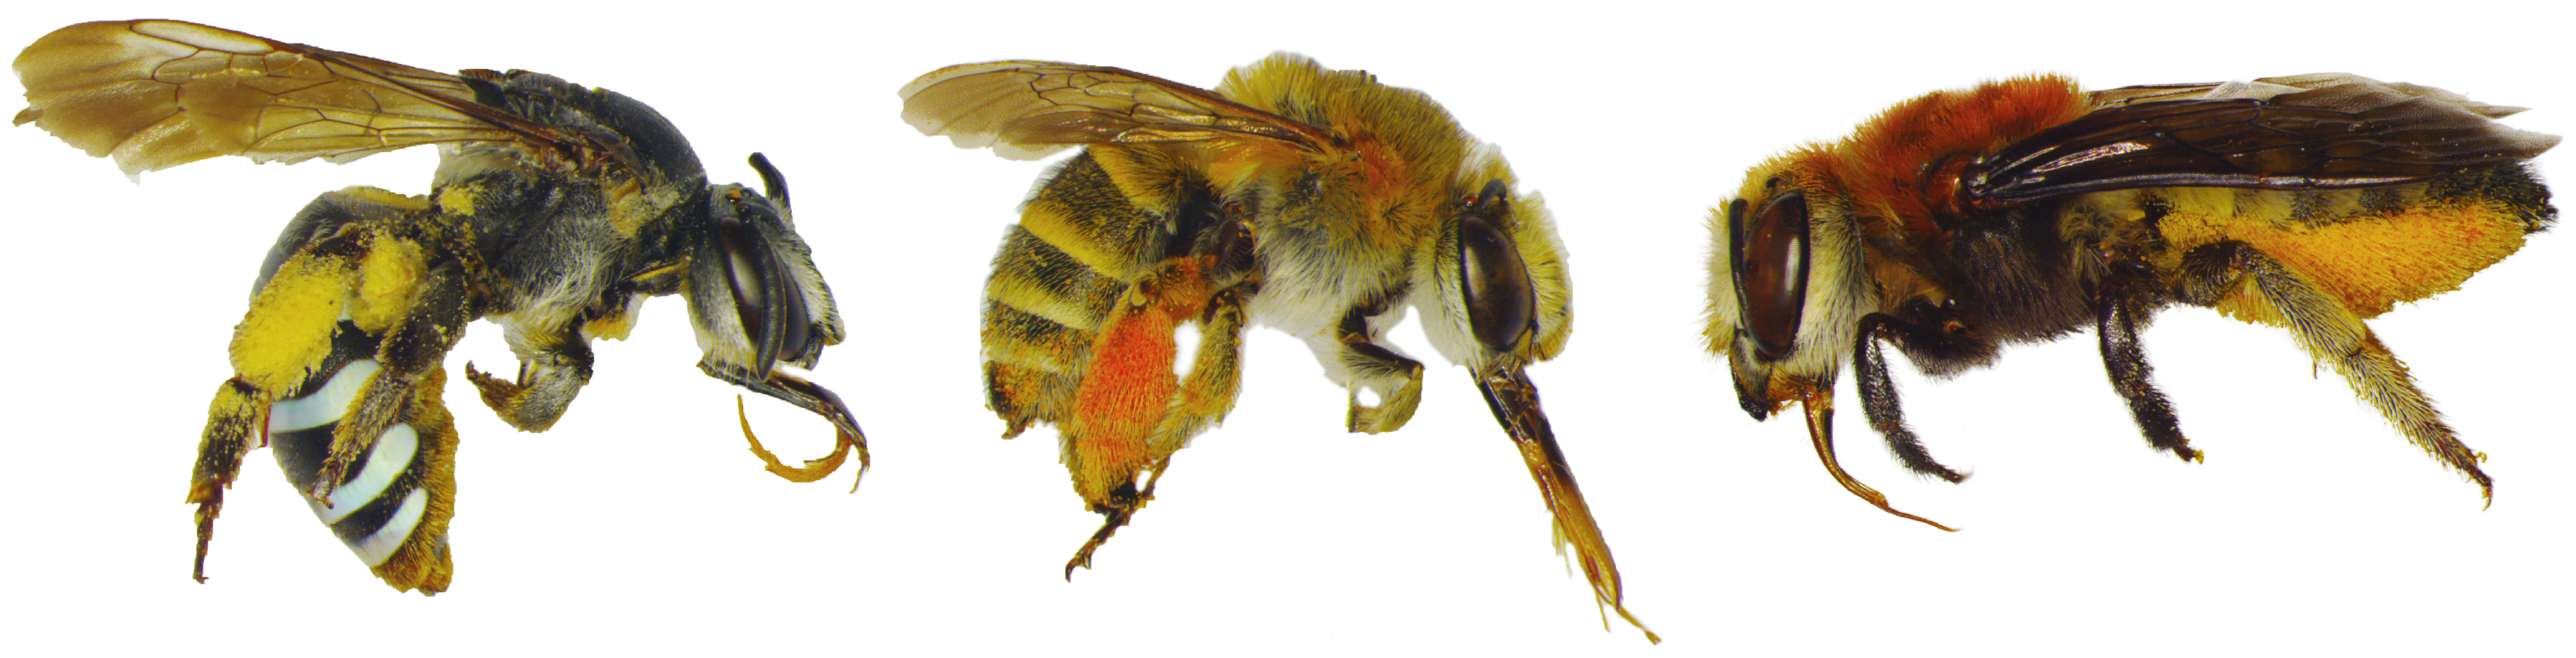 Females of most bee species have specialized pollen collecting hairs on their legs or underneath their abdomen to carry pollen from flowers to their nest. The different pollen species (note the different colors) collected by these bee species likely differ in protein:lipid ratios (P:L) that they are adapted to eat. Bee species: L - Nomia amabilis collected on Rafnia elliptica; M – Megchile discolor collected on Acacia karoo and Grewia robusta; R – Amegilla aspergina collected on Morea inclanata. Photos by Anthony Vaudo